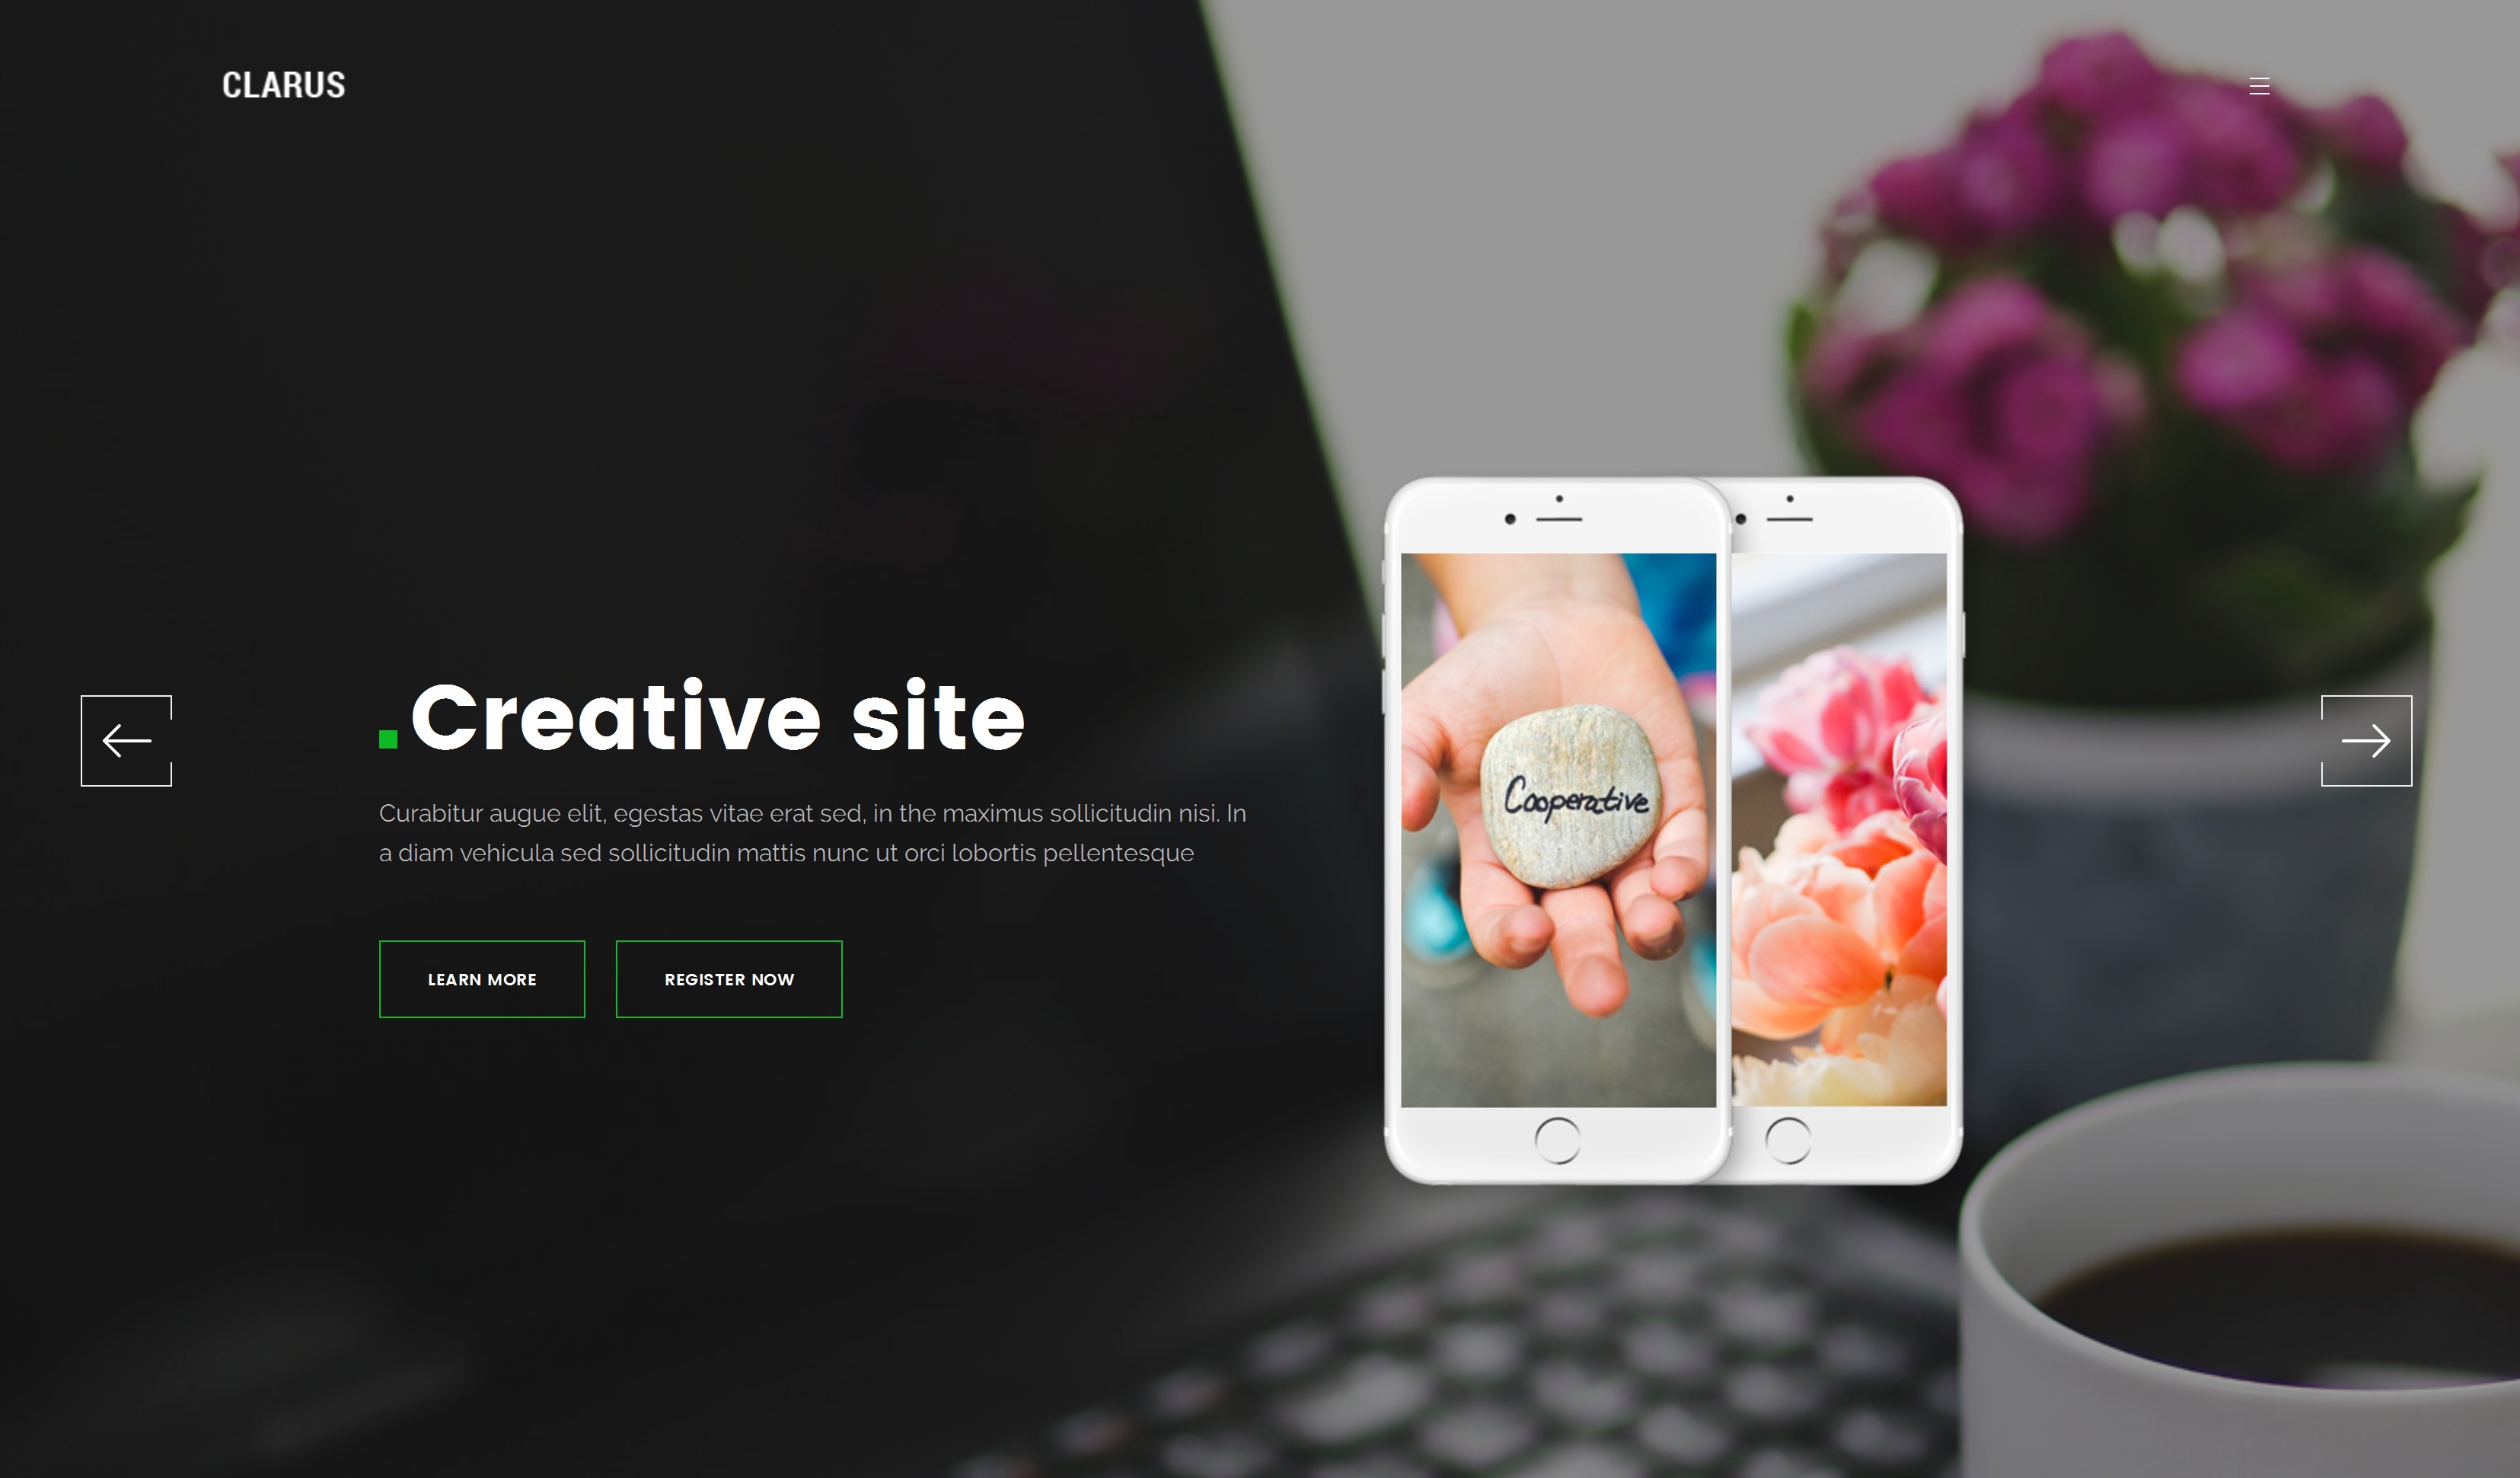 Mobile Bootstrap Image Gallery Theme